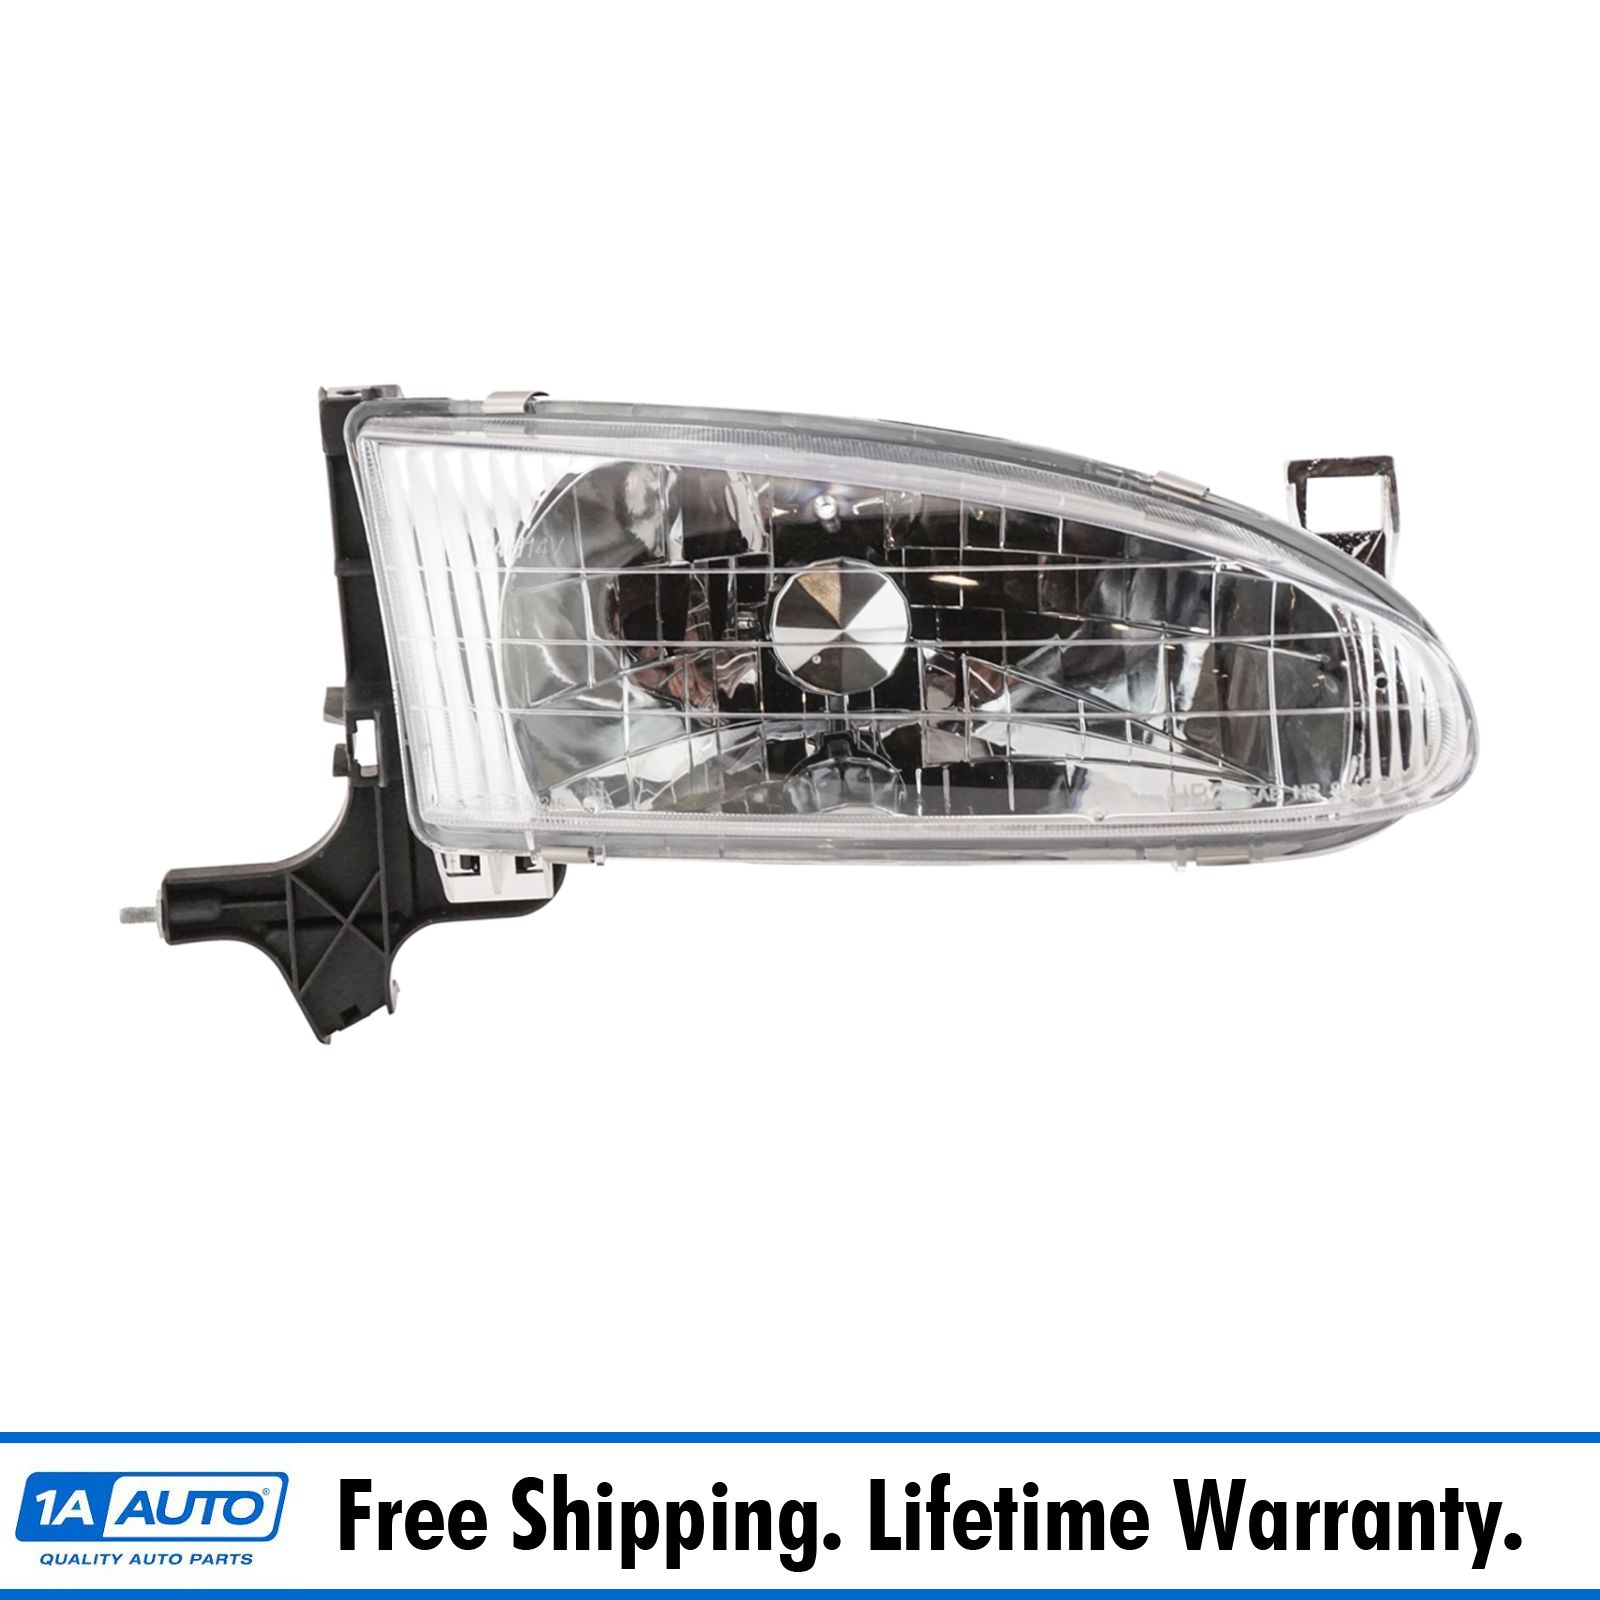 FOR 1998-02 LINCOLN NAVIGATOR New Replacement Headlight Assembly RH